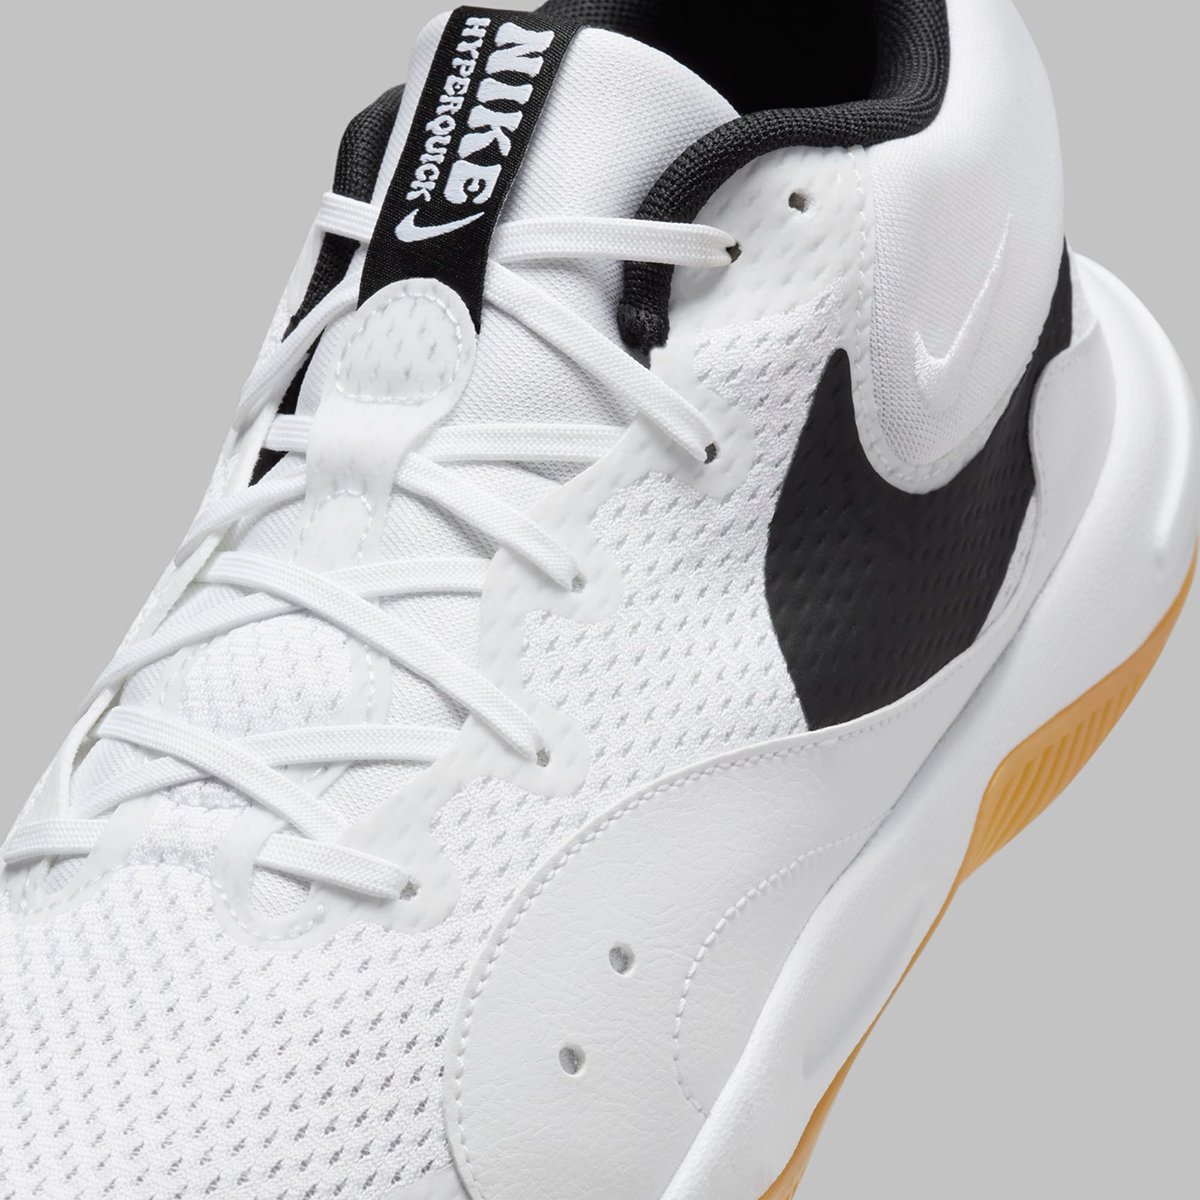 Nike Hyperquick Volleyball Shoes White Black Fn4678 100 3